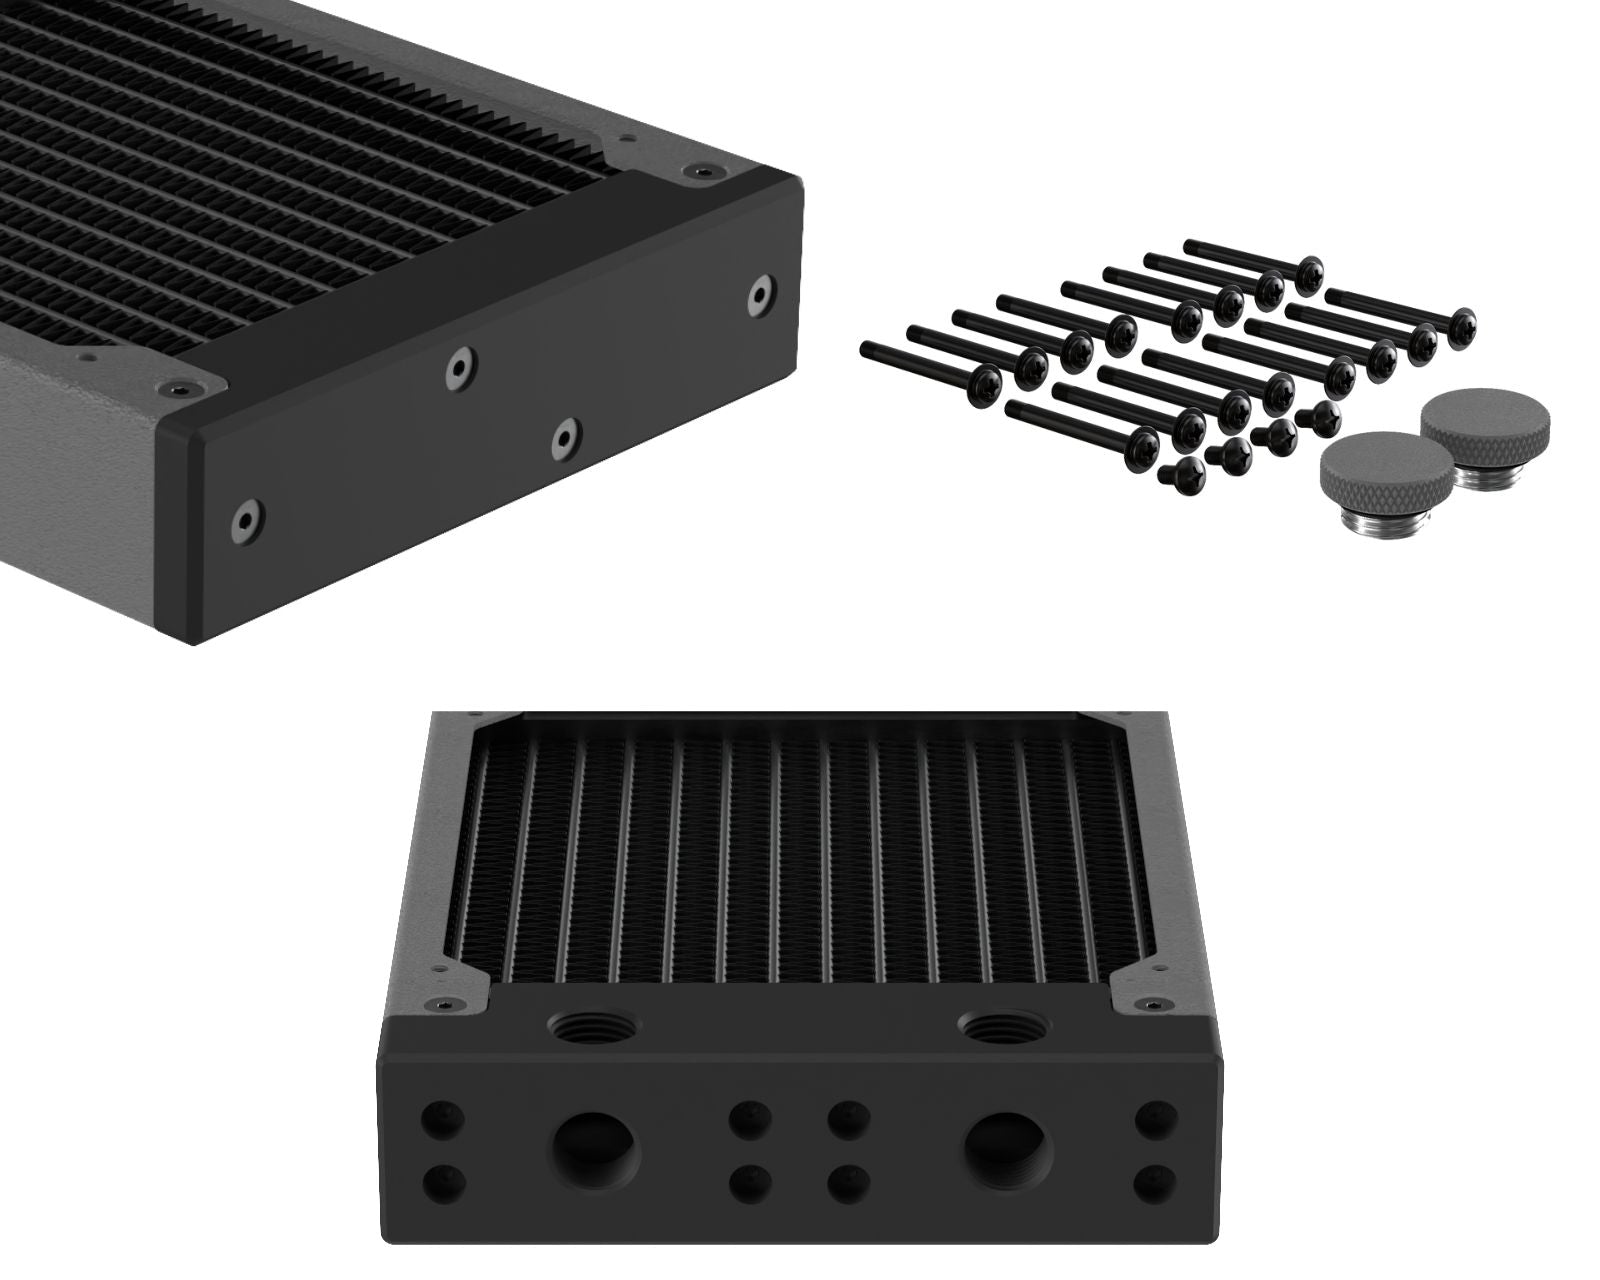 PrimoChill 480SL (30mm) EXIMO Modular Radiator, Black POM, 4x120mm, Quad Fan (R-SL-BK48) Available in 20+ Colors, Assembled in USA and Custom Watercooling Loop Ready - TX Matte Gun Metal